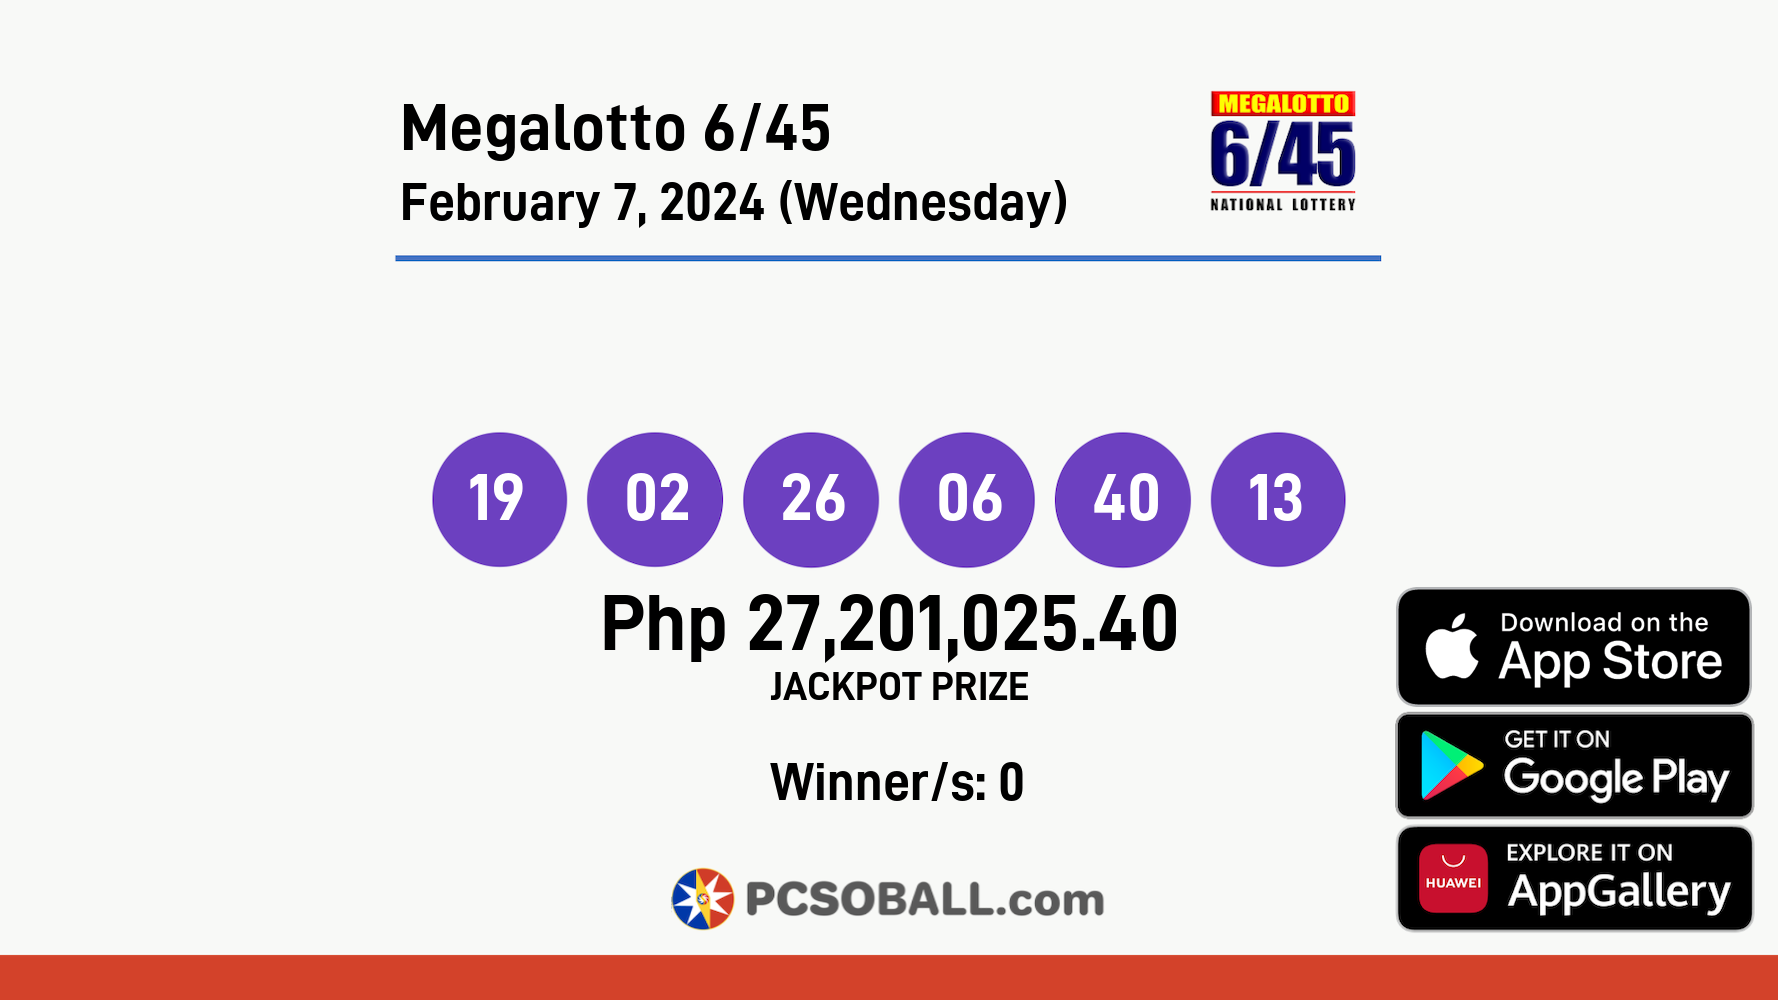 Megalotto 6/45 February 7, 2024 (Wednesday) Result